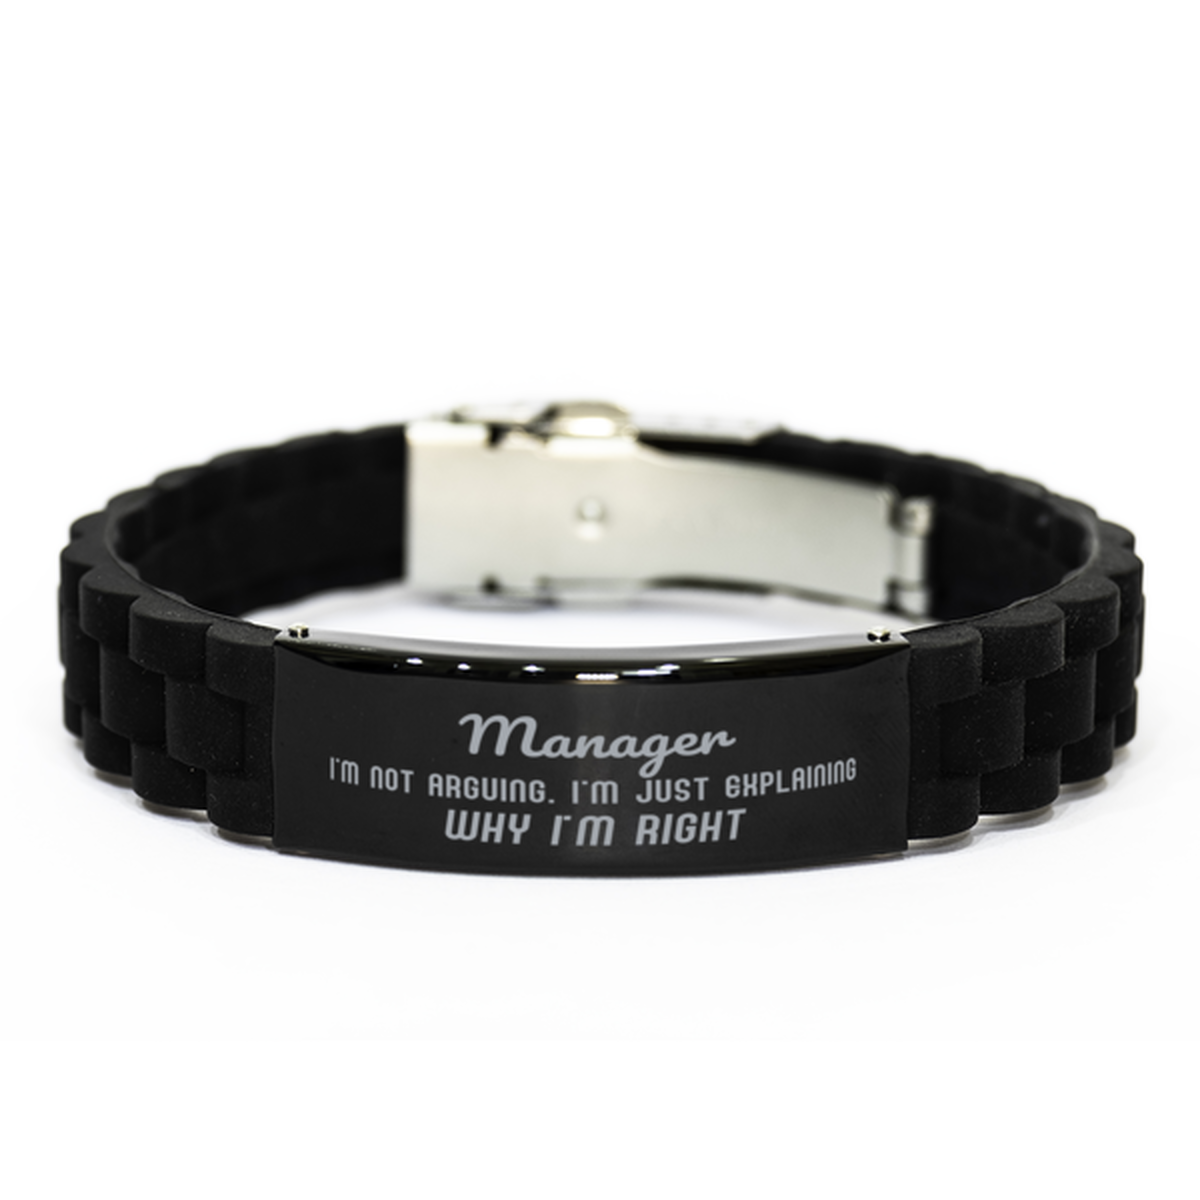 Manager I'm not Arguing. I'm Just Explaining Why I'm RIGHT Black Glidelock Clasp Bracelet, Funny Saying Quote Manager Gifts For Manager Graduation Birthday Christmas Gifts for Men Women Coworker